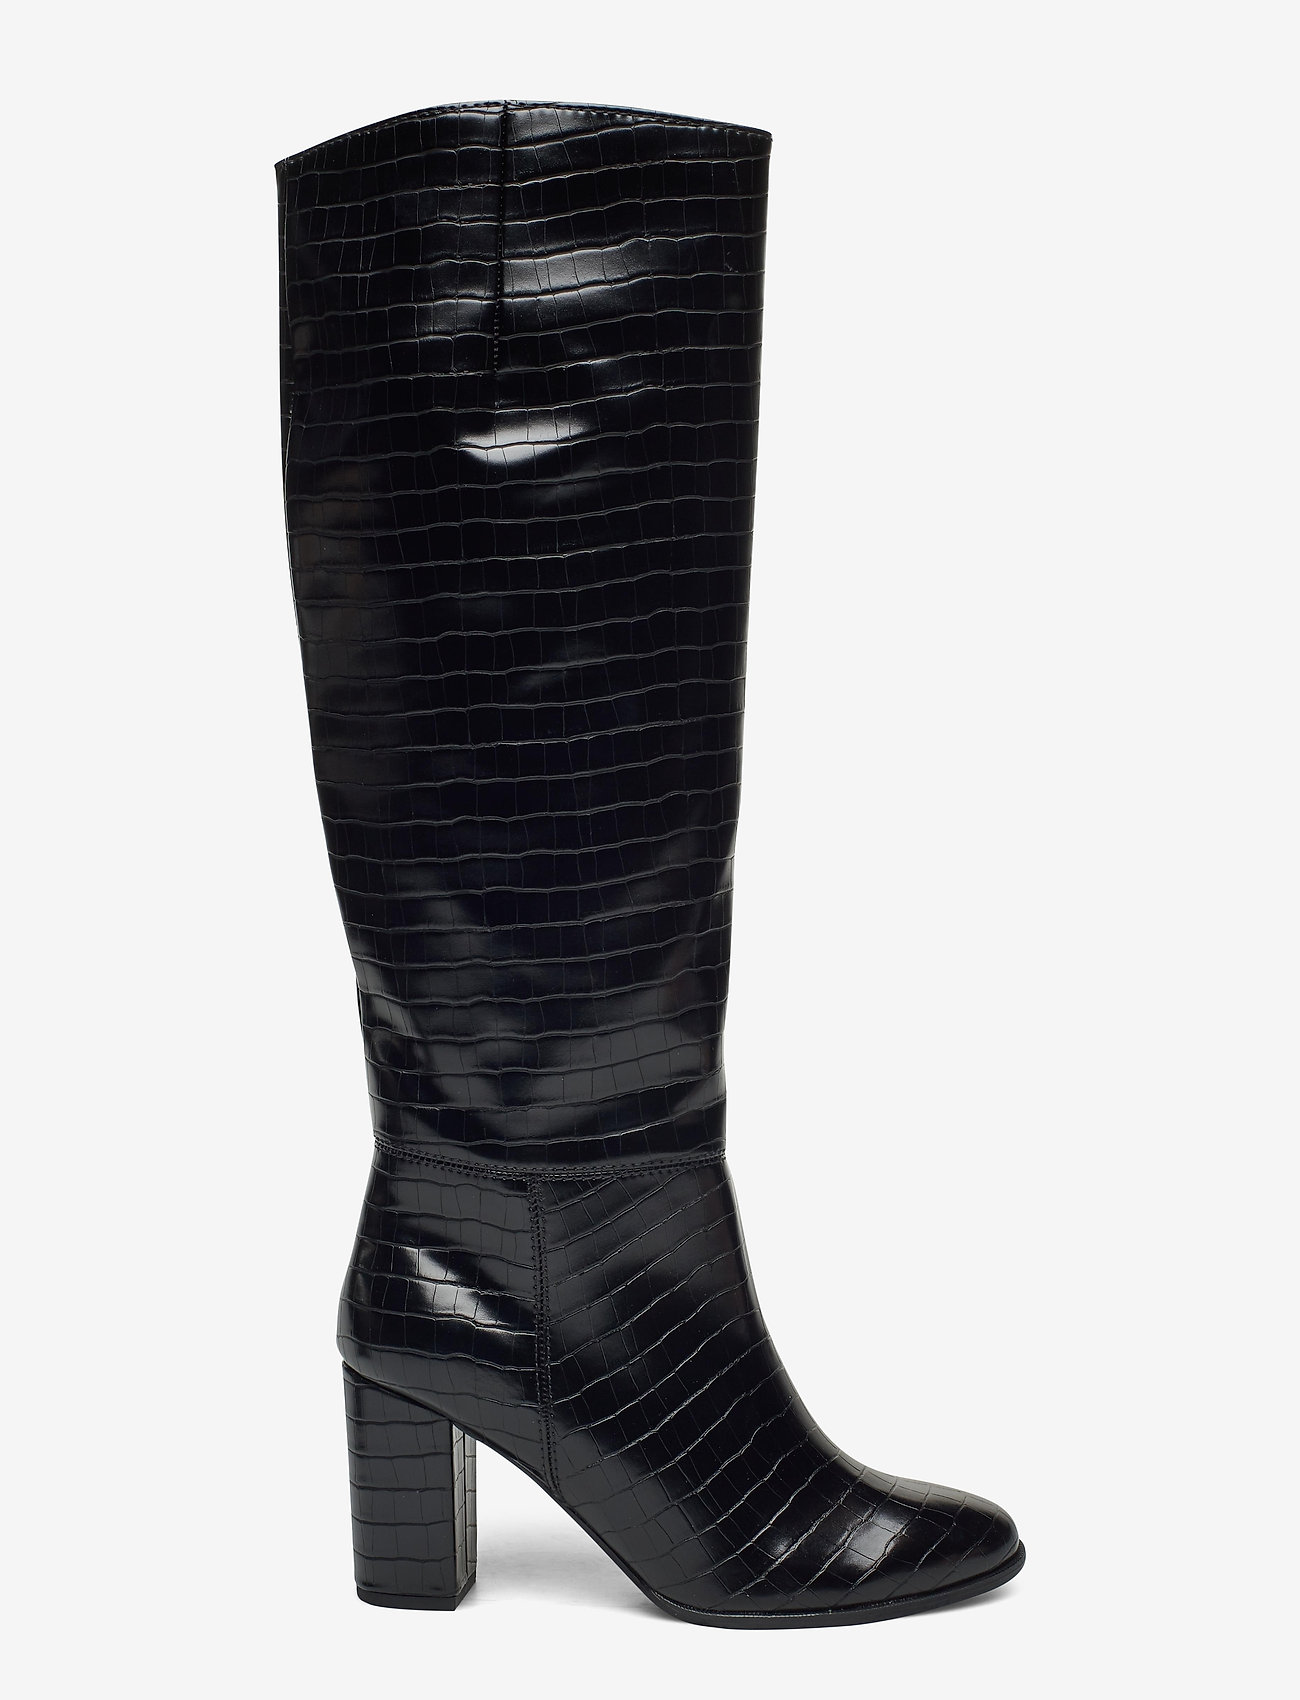 Woms Boots (Black Croco) (59.97 